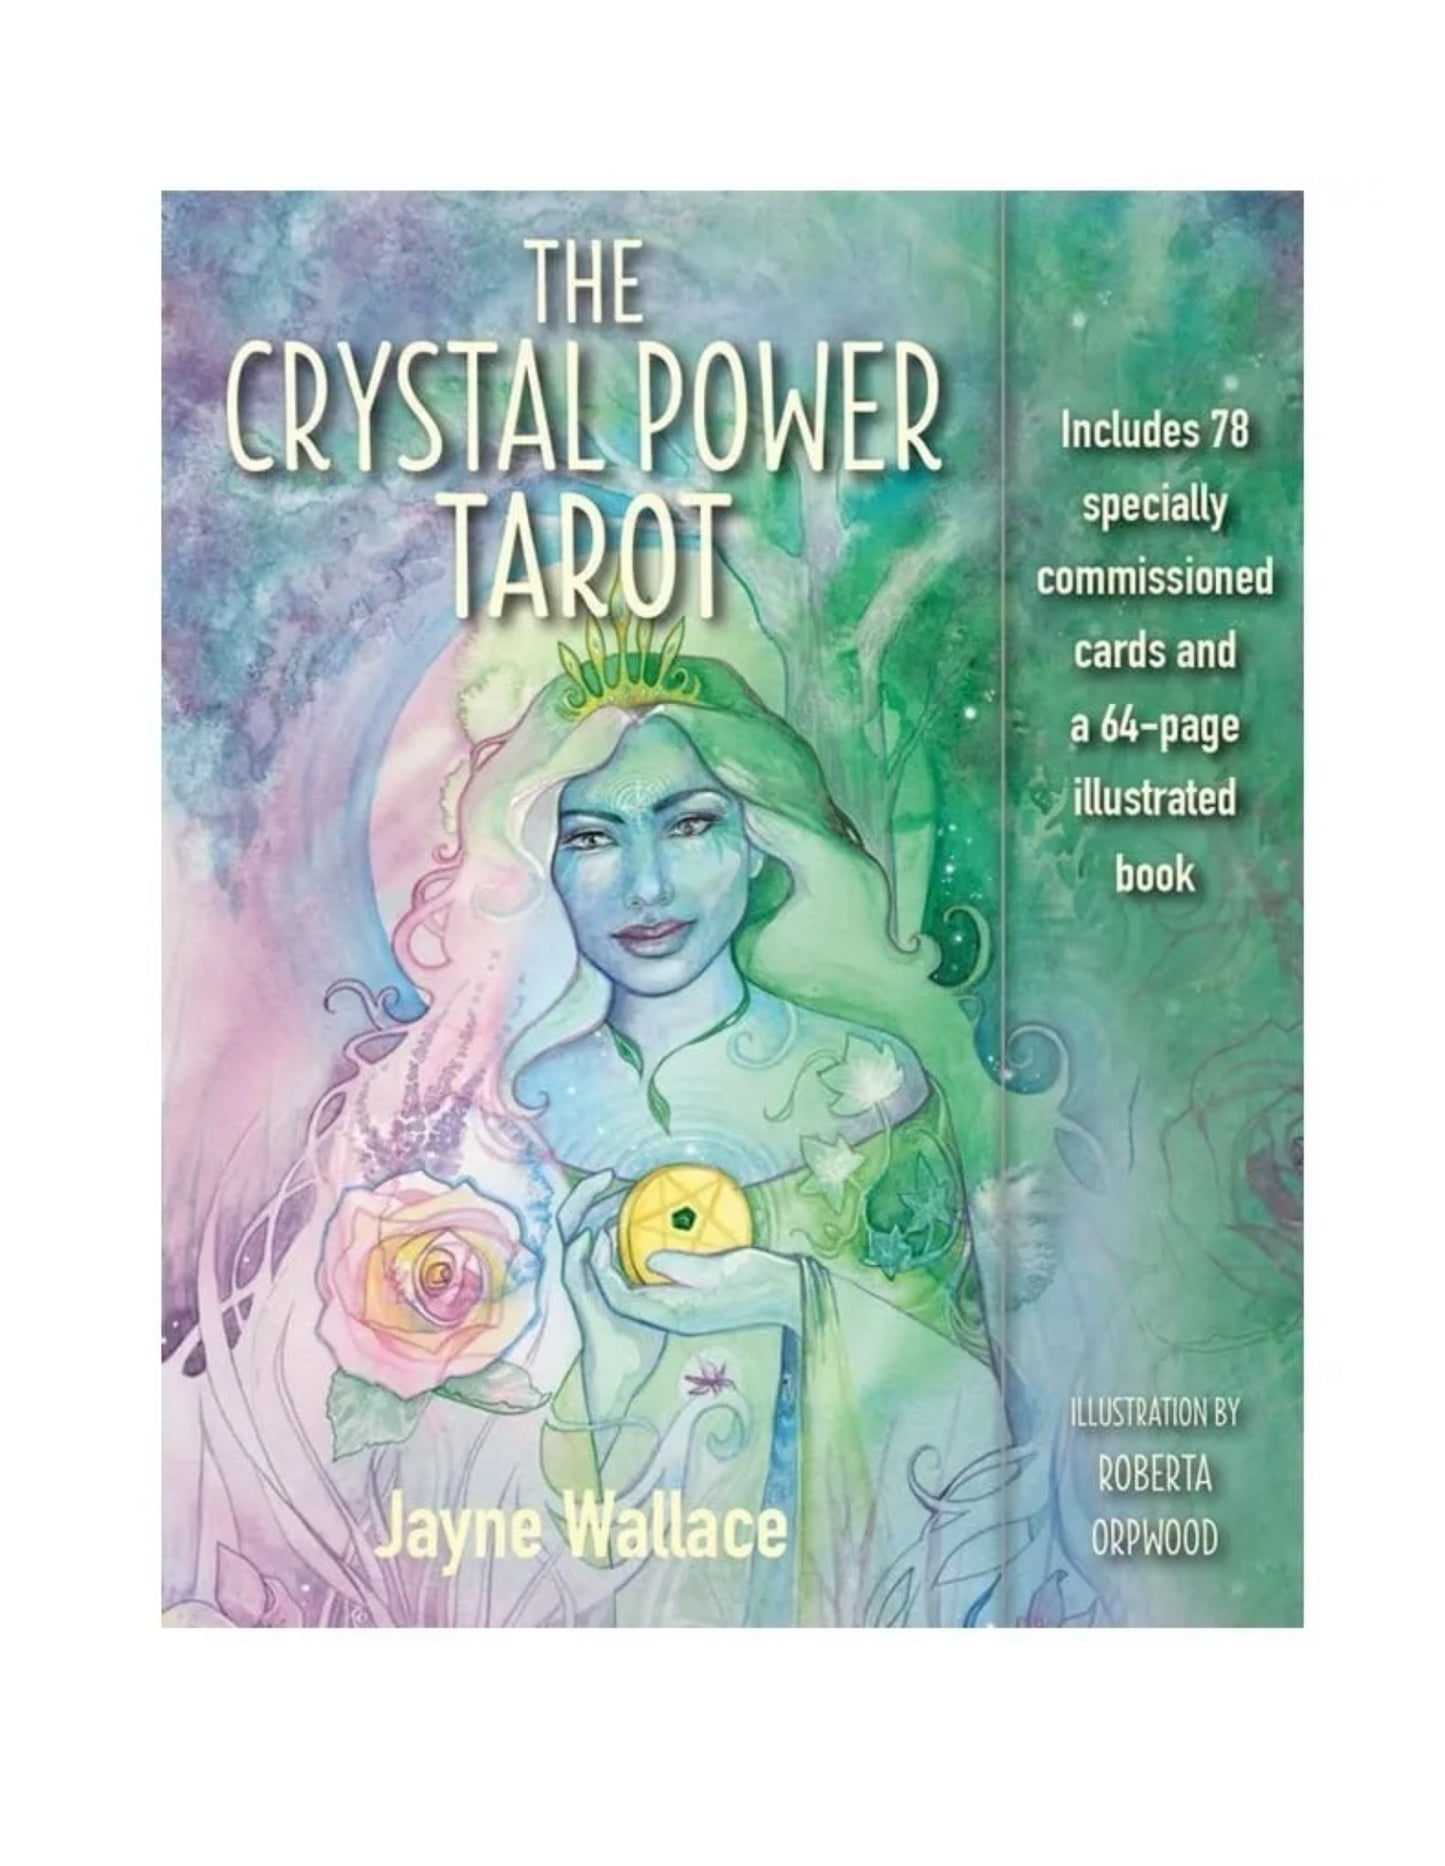 THE CRYSTAL POWER TAROT BY JAYNE WALLACE - Psychic Sisters